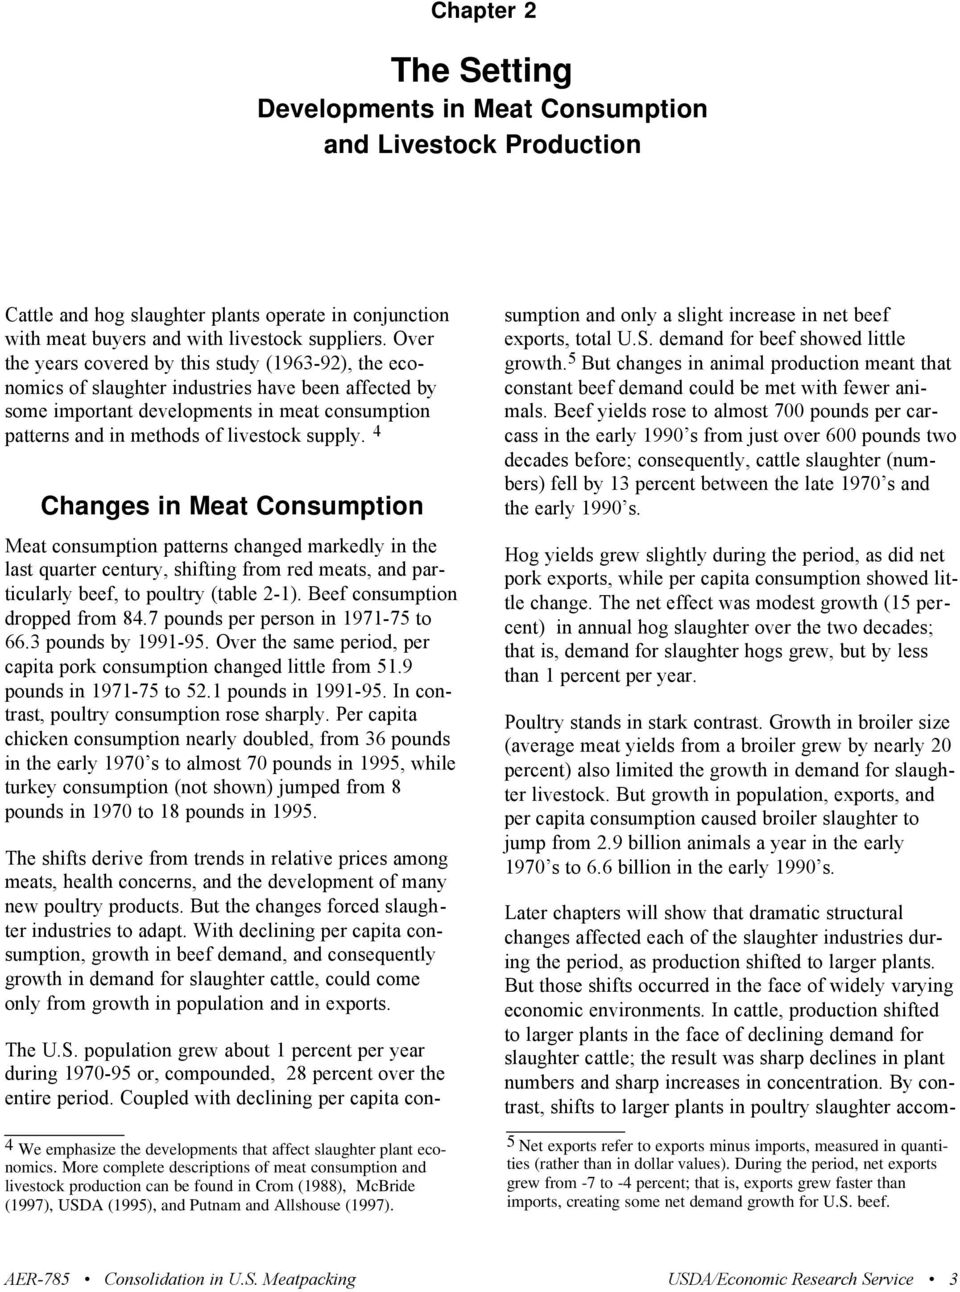 4 Changes in Meat Consumption Meat consumption patterns changed markedly in the last quarter century, shifting from red meats, and particularly beef, to poultry (table 2-1).